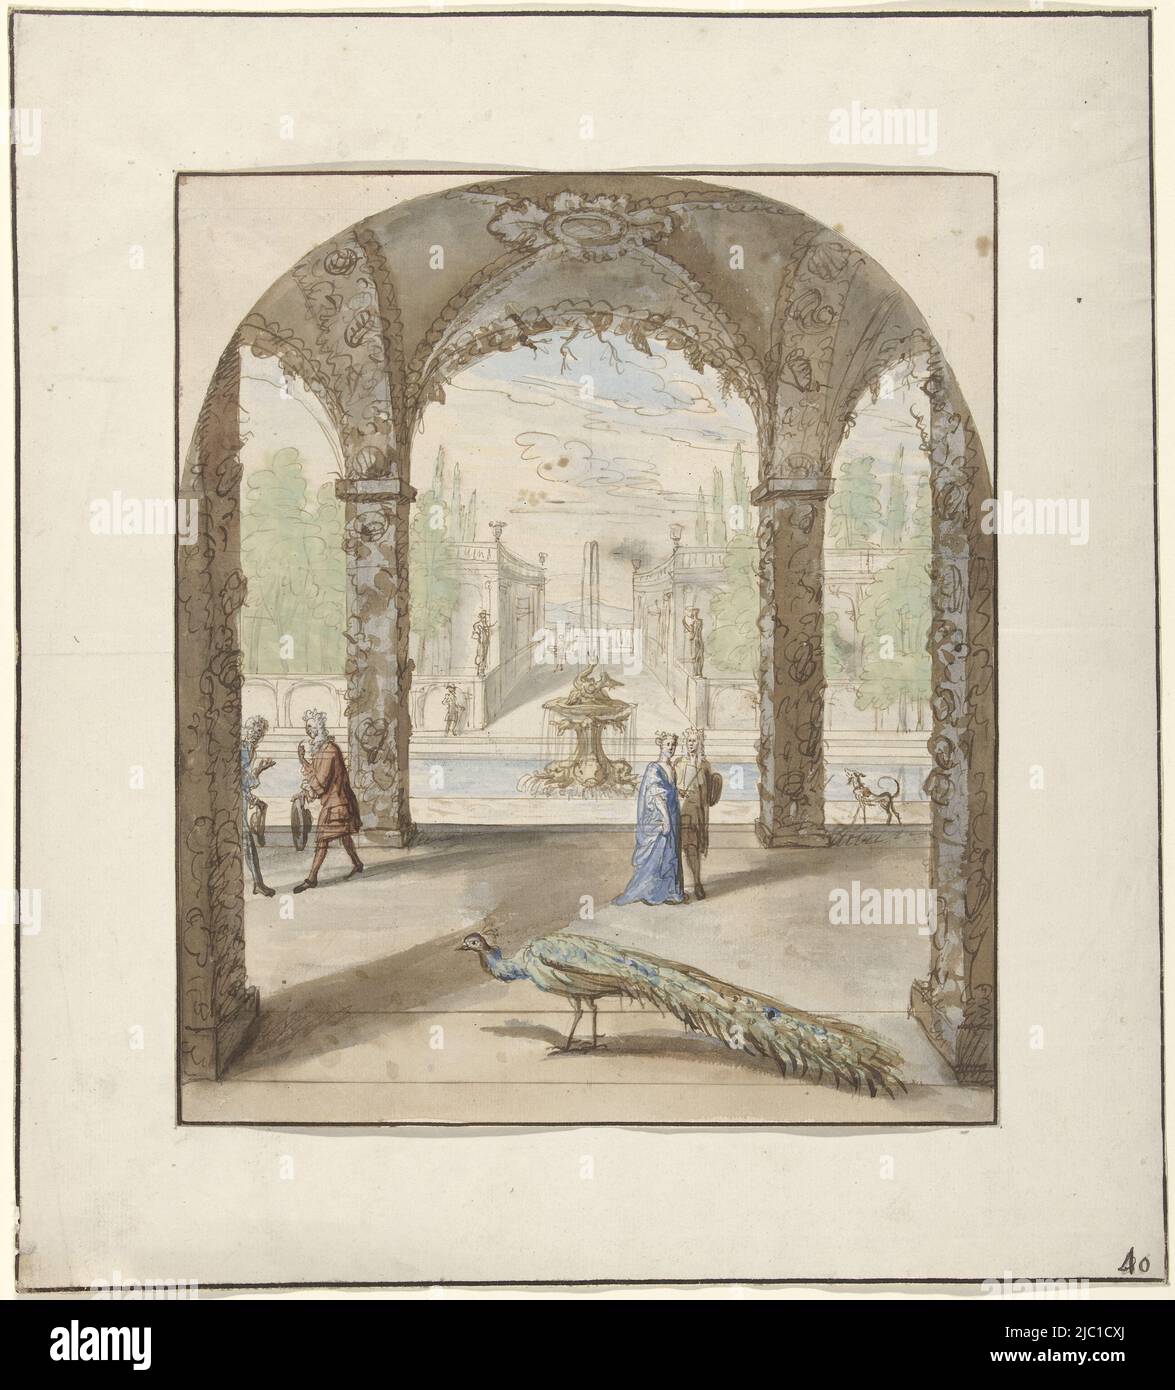 Design for a room painting with a view through a grotto with a peacock on a garden with a fountain, Design for a room painting with a view through a grotto, draughtsman: Elias van Nijmegen, 1677 - 1755, paper, pen, brush, h 273 mm × w 235 mm Stock Photo